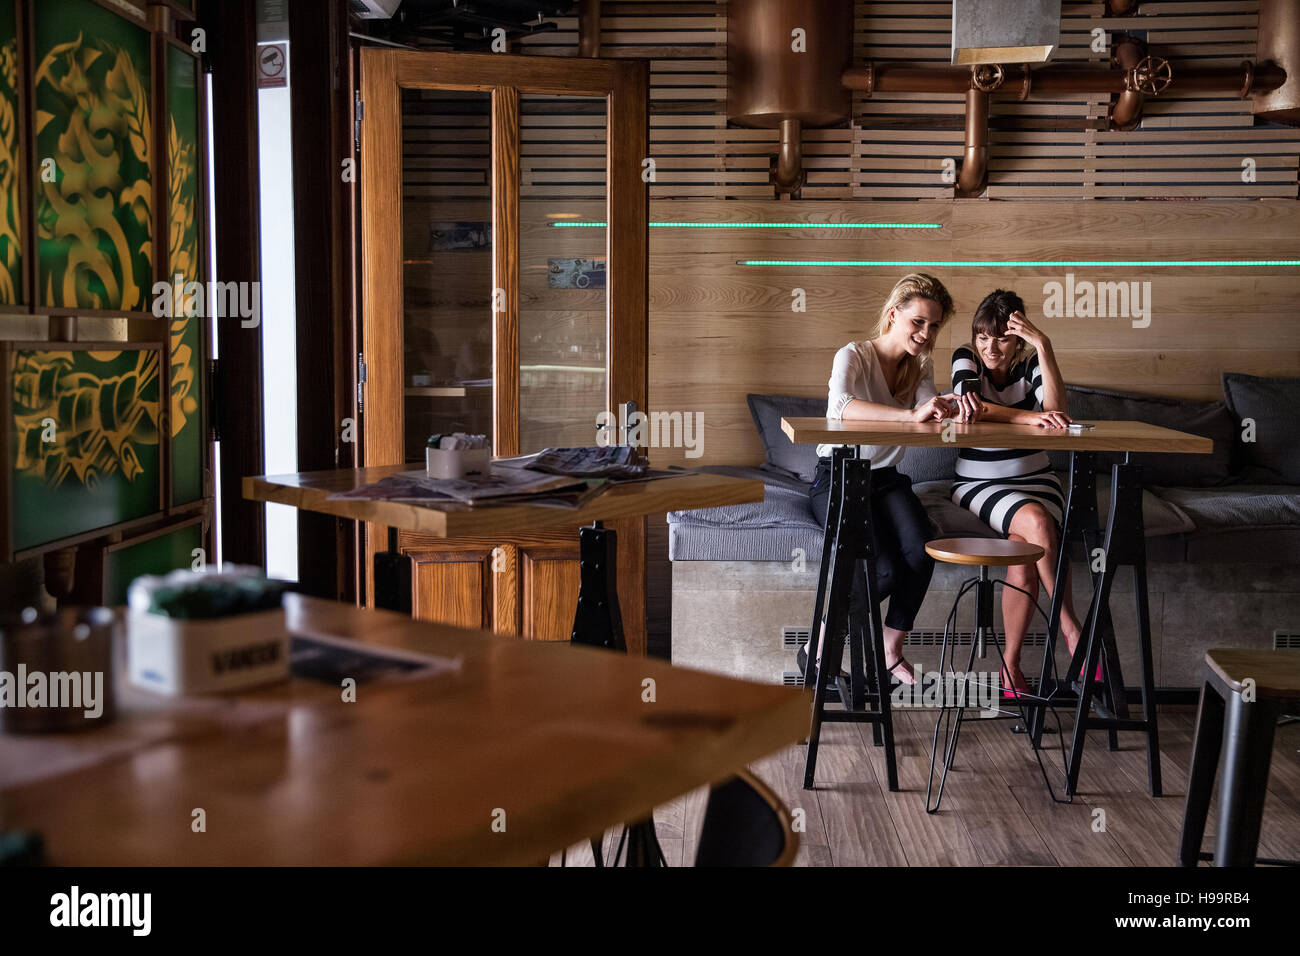 Two women in coffee shop using their smartphones Stock Photo